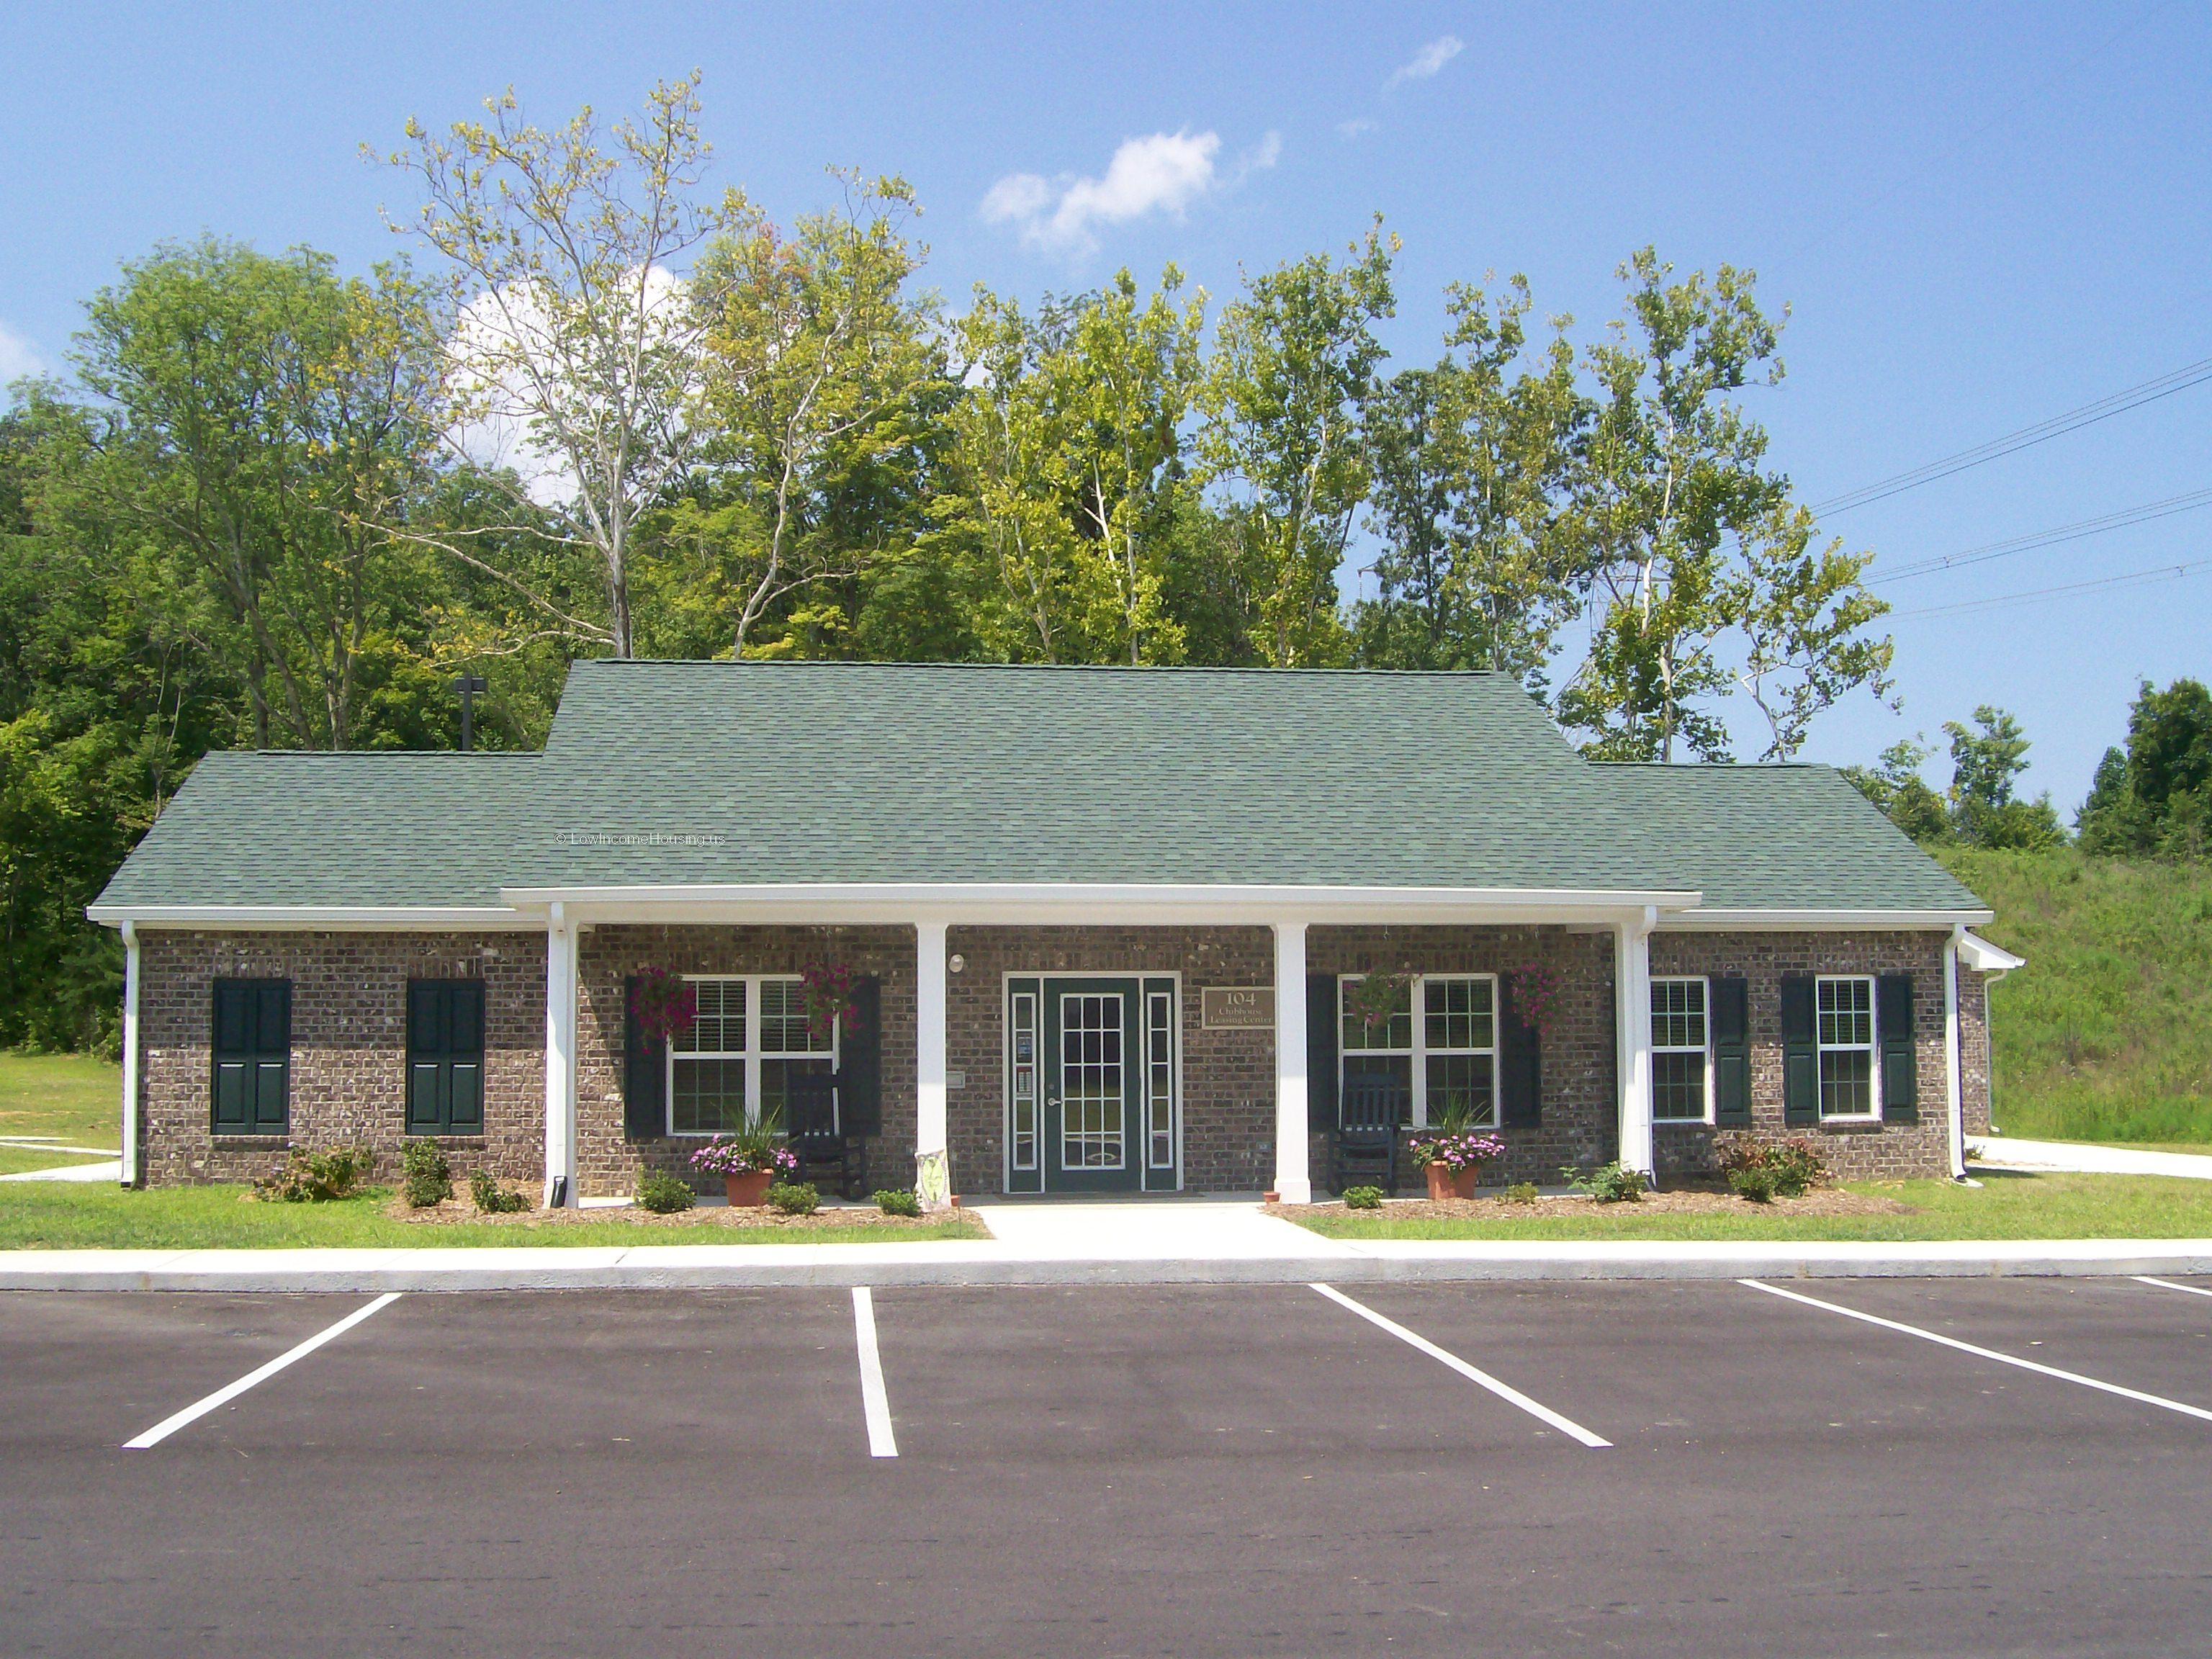 Clubhouse and Learning Center with large windows with exterior shutters and curbside parking.